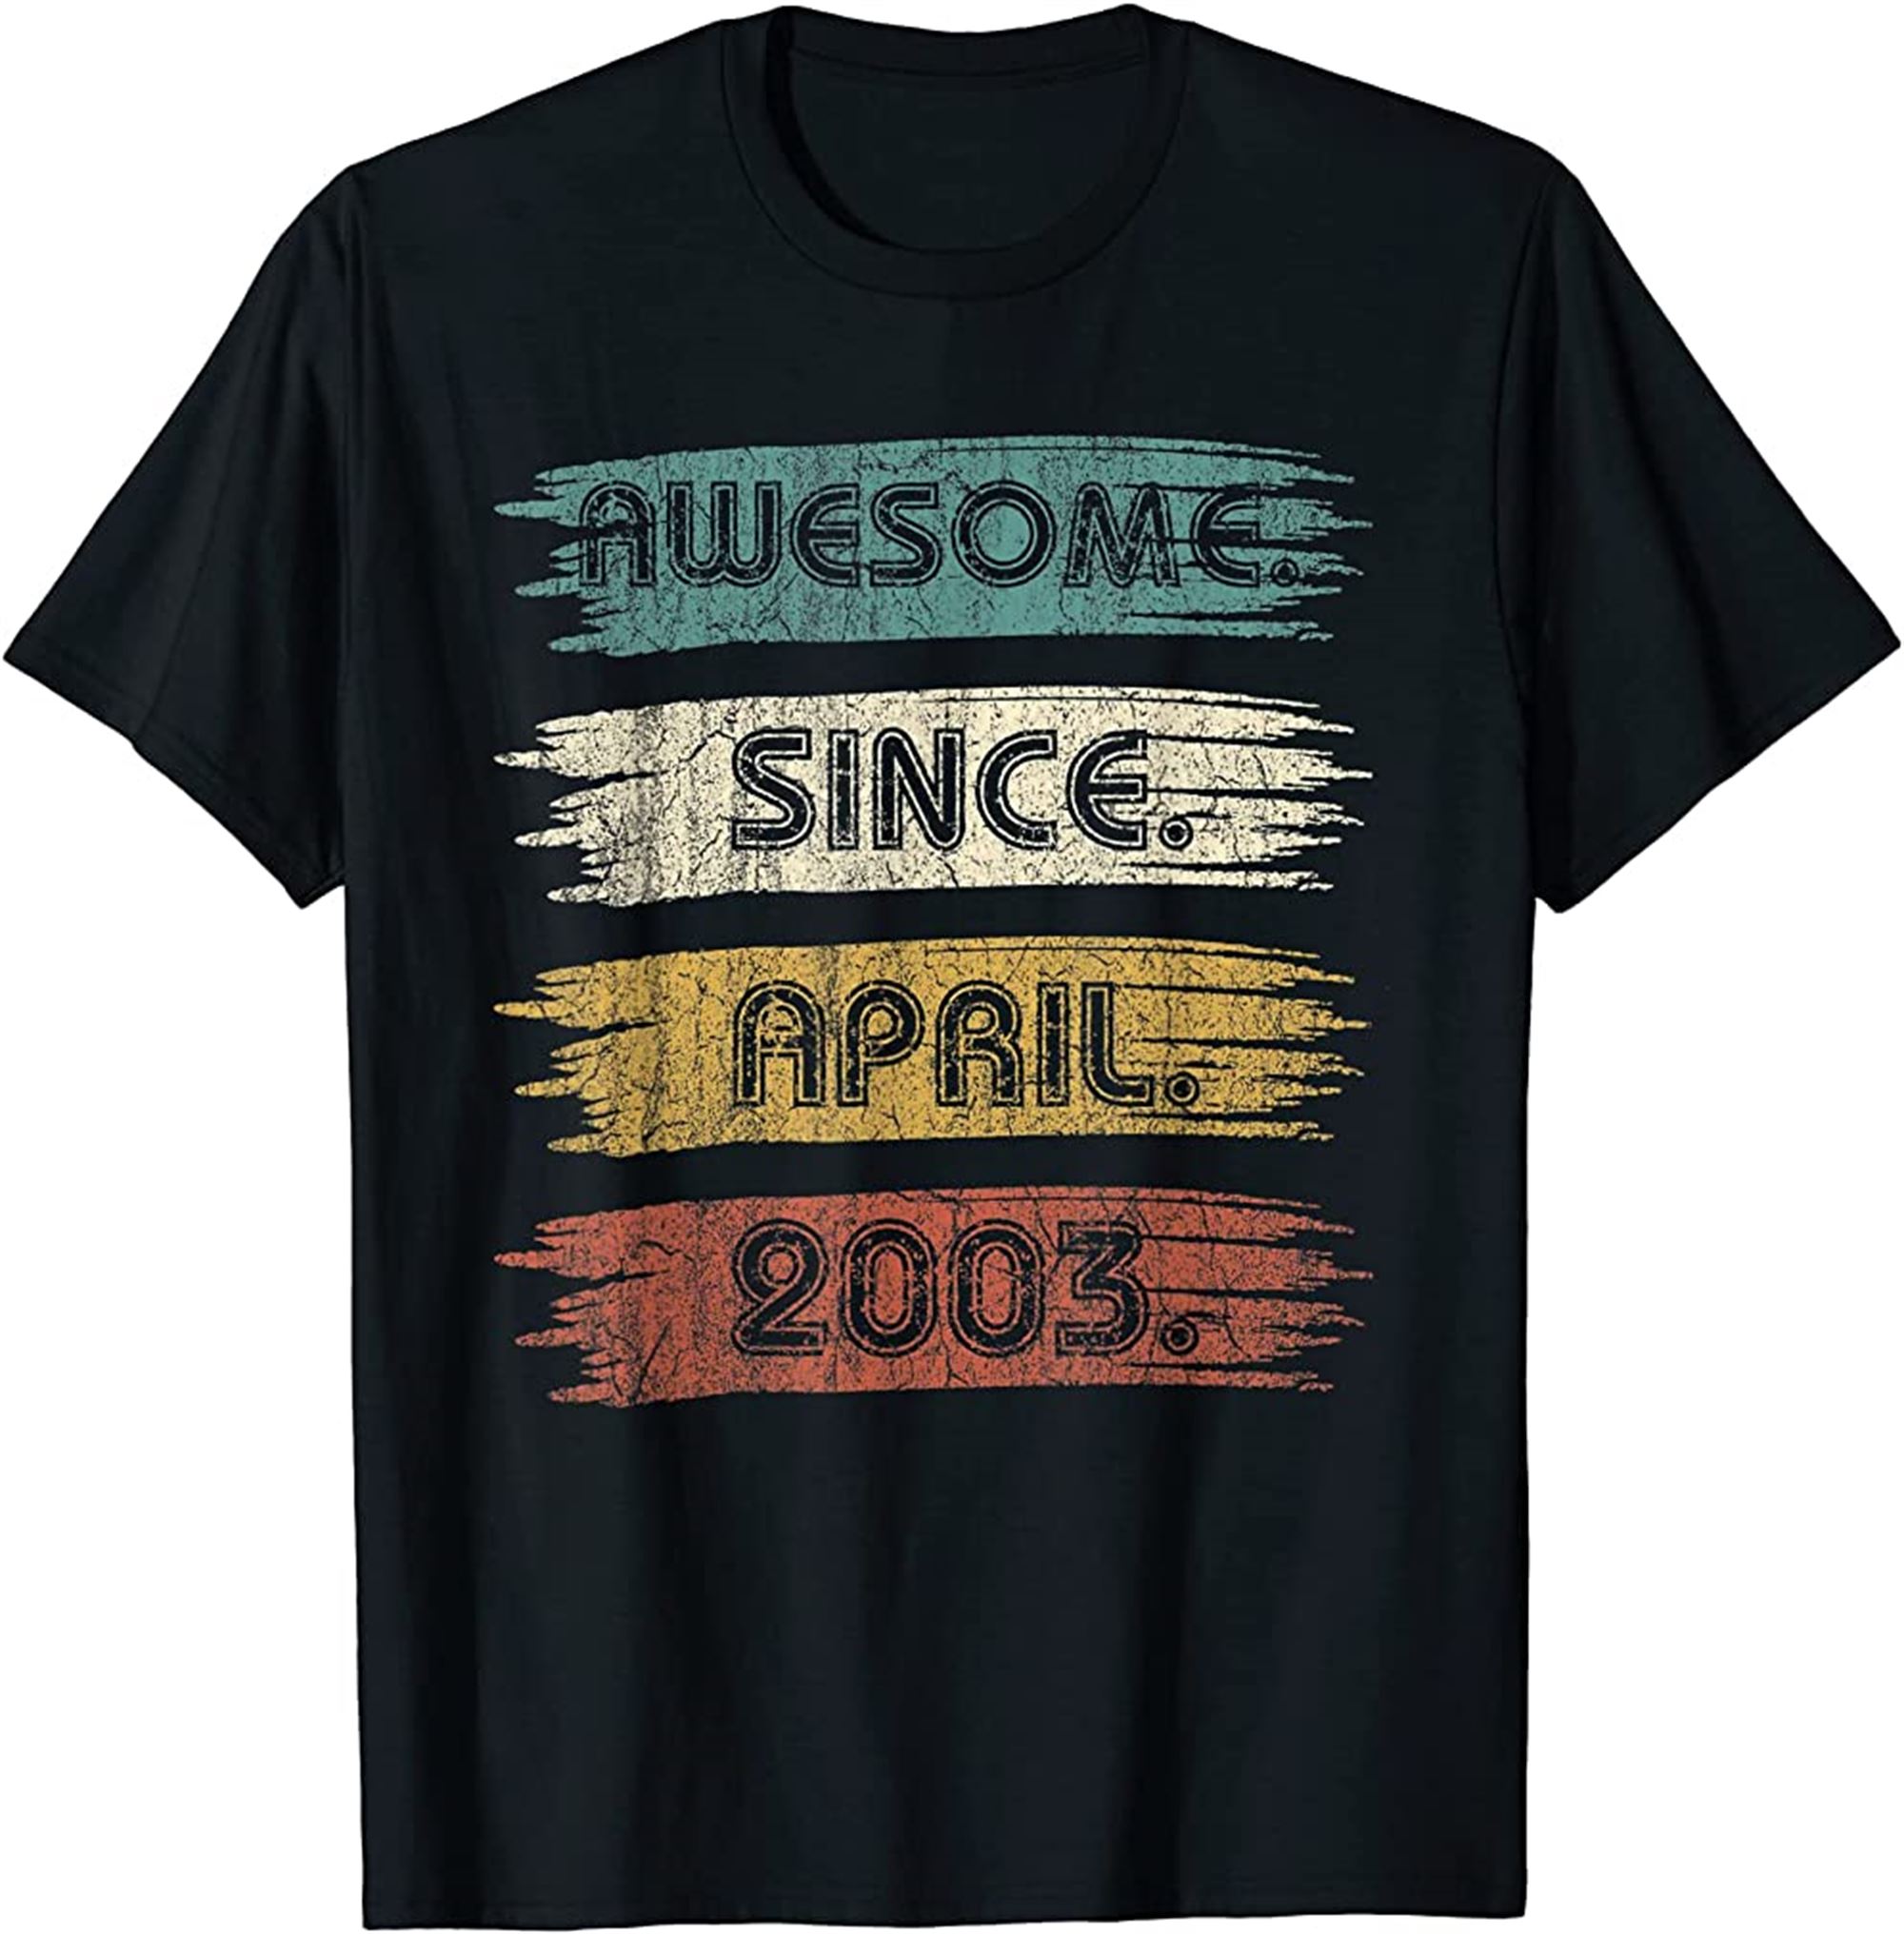 19 Years Old Gifts Awesome Since April 2003 19th Birthday T-shirt Size Up To 5xl